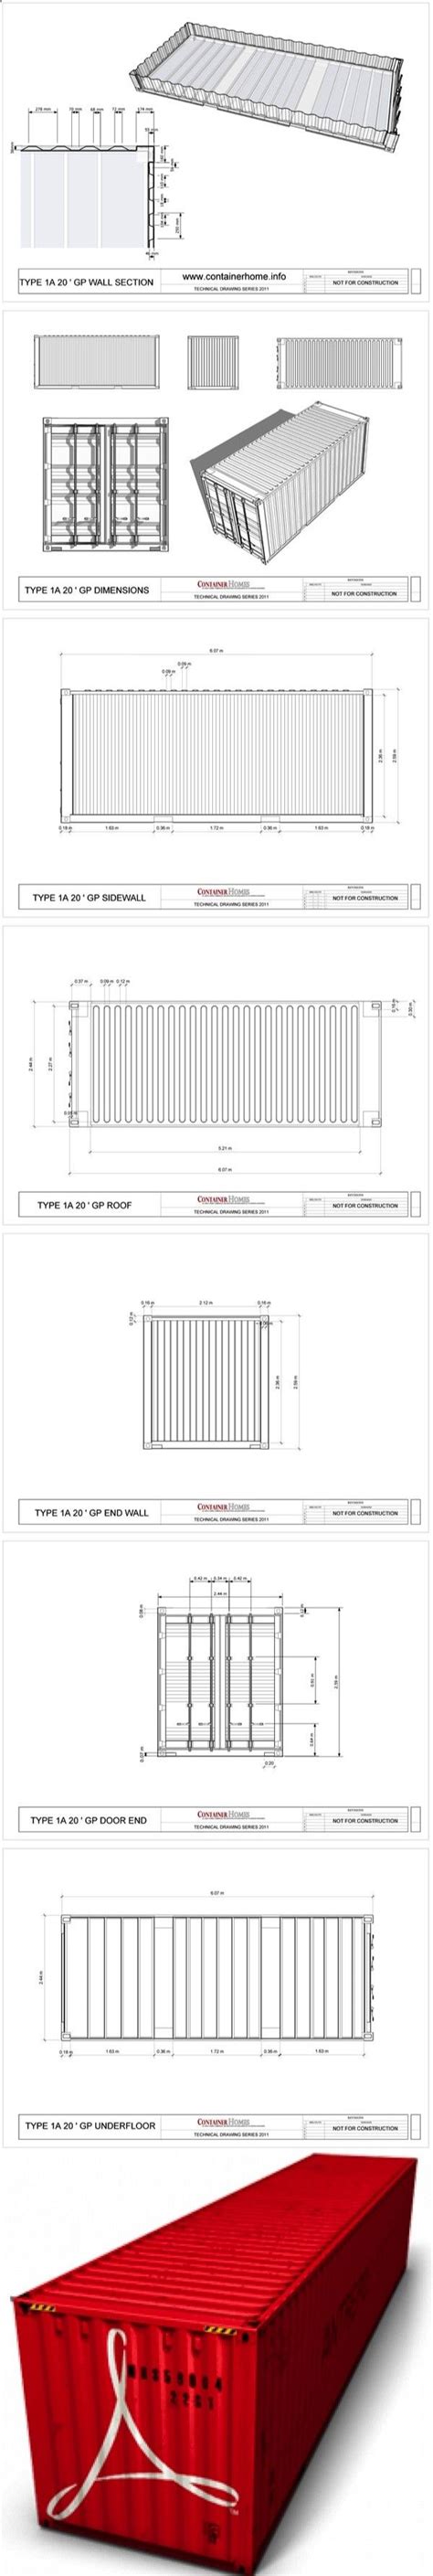 Free Shipping Container Technical Drawing Package Kiến Trúc